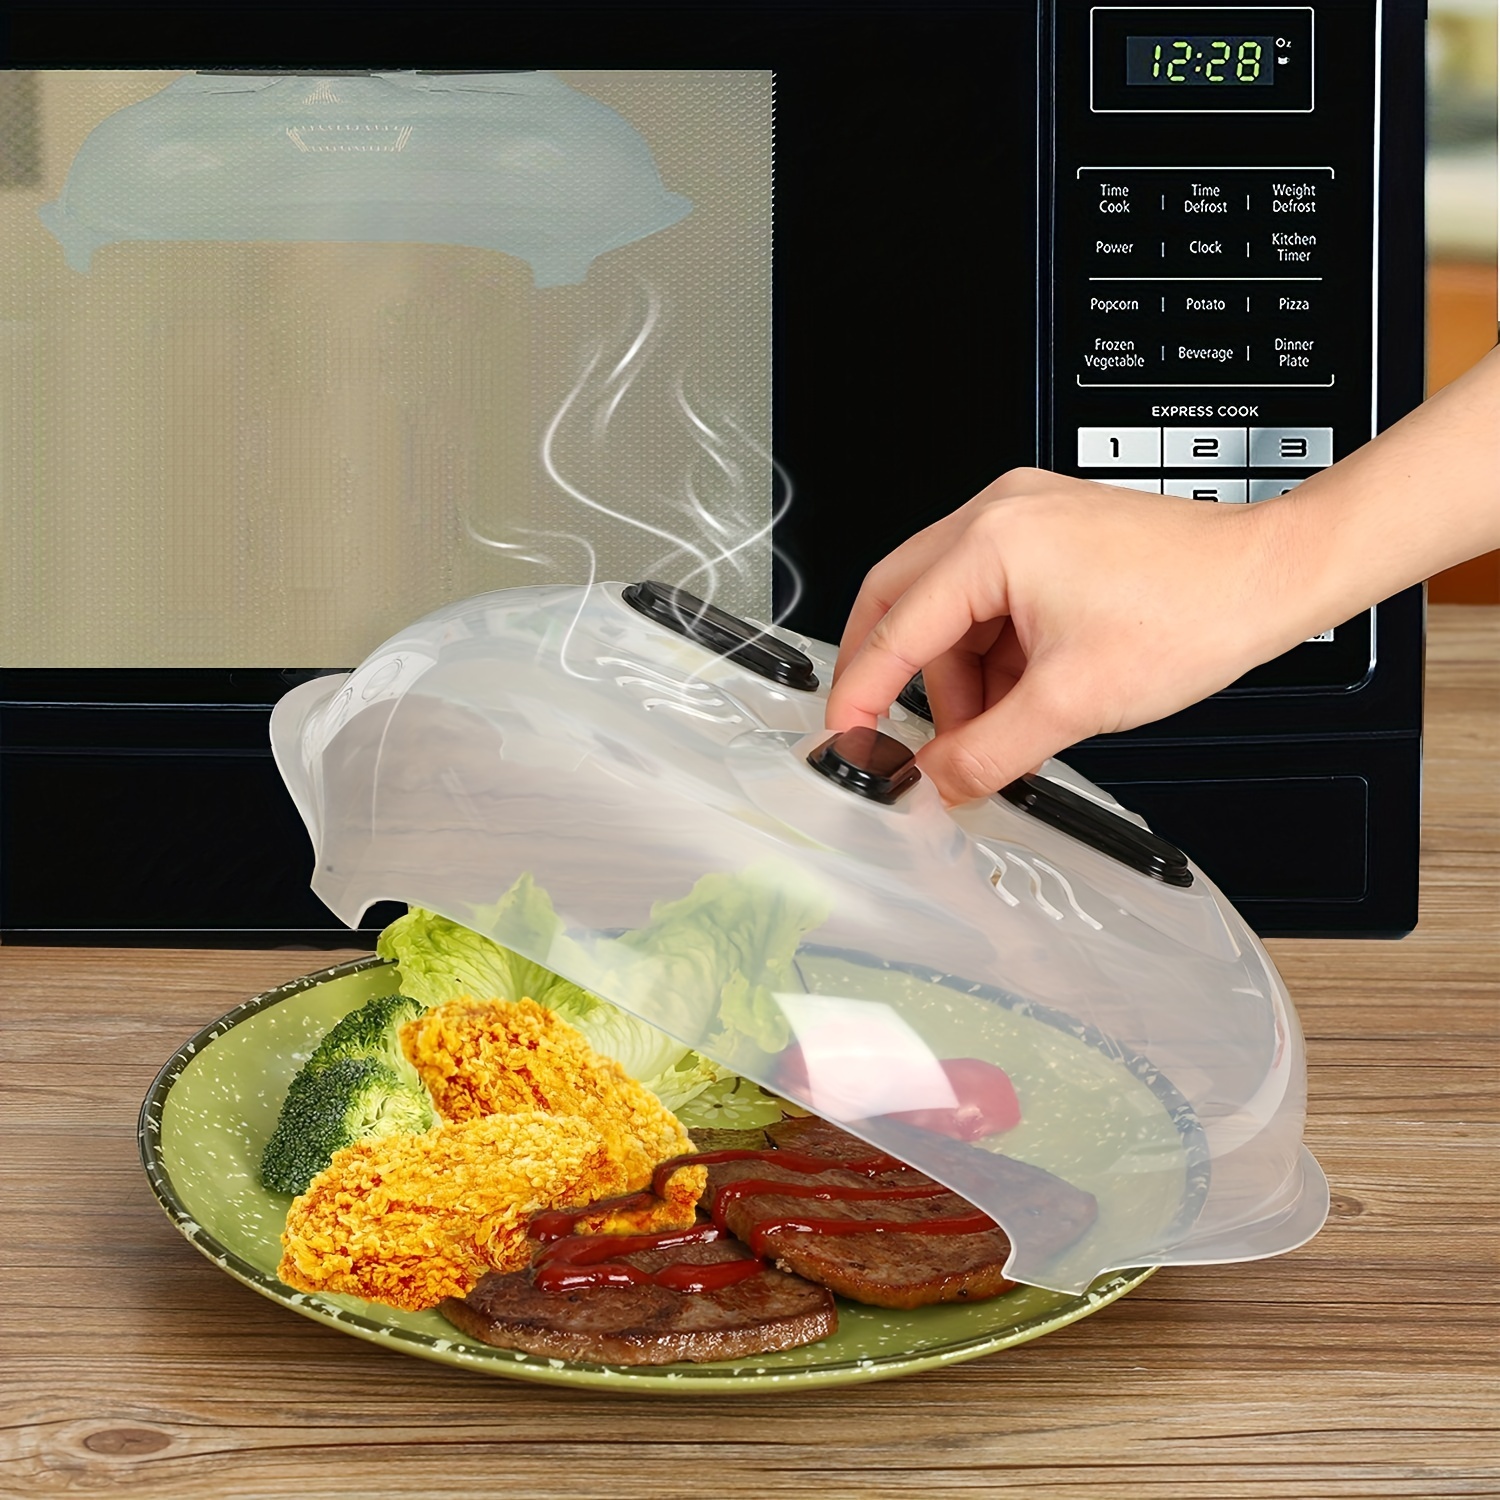 Microwave Splatter Cover, Microwave Cover, Plastic Microwave Cover